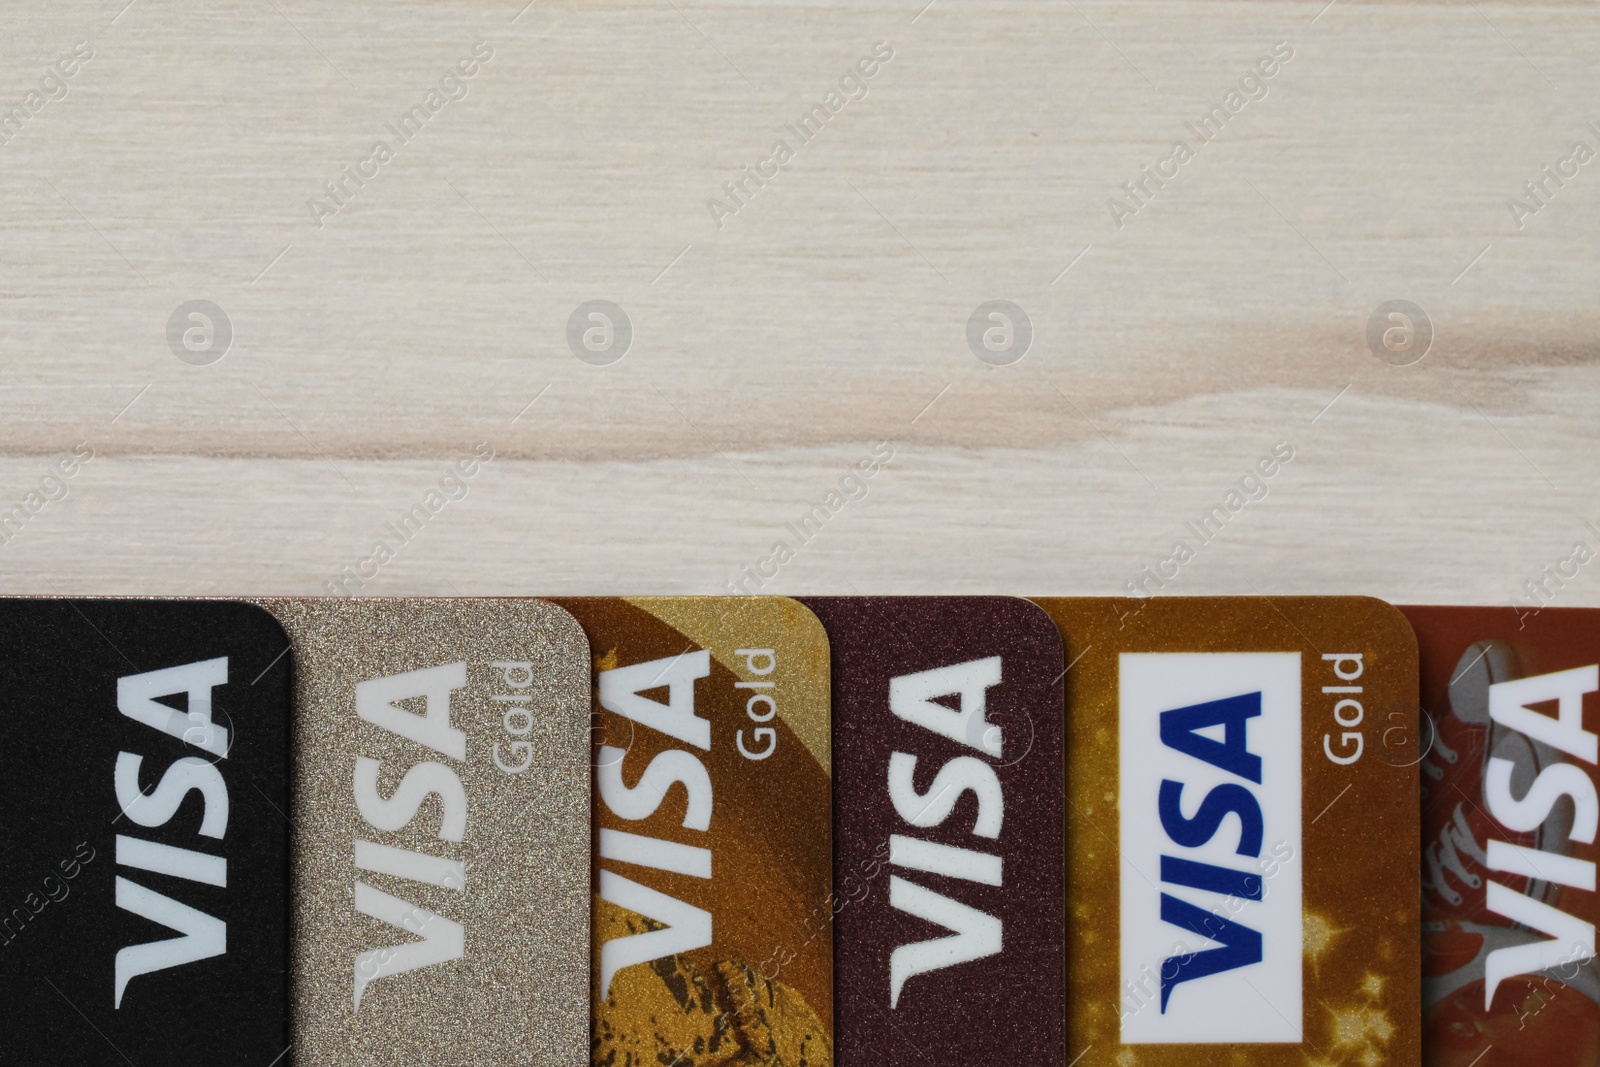 Photo of MYKOLAIV, UKRAINE - FEBRUARY 22, 2022: Visa credit cards on white wooden table, flat lay. Space for text